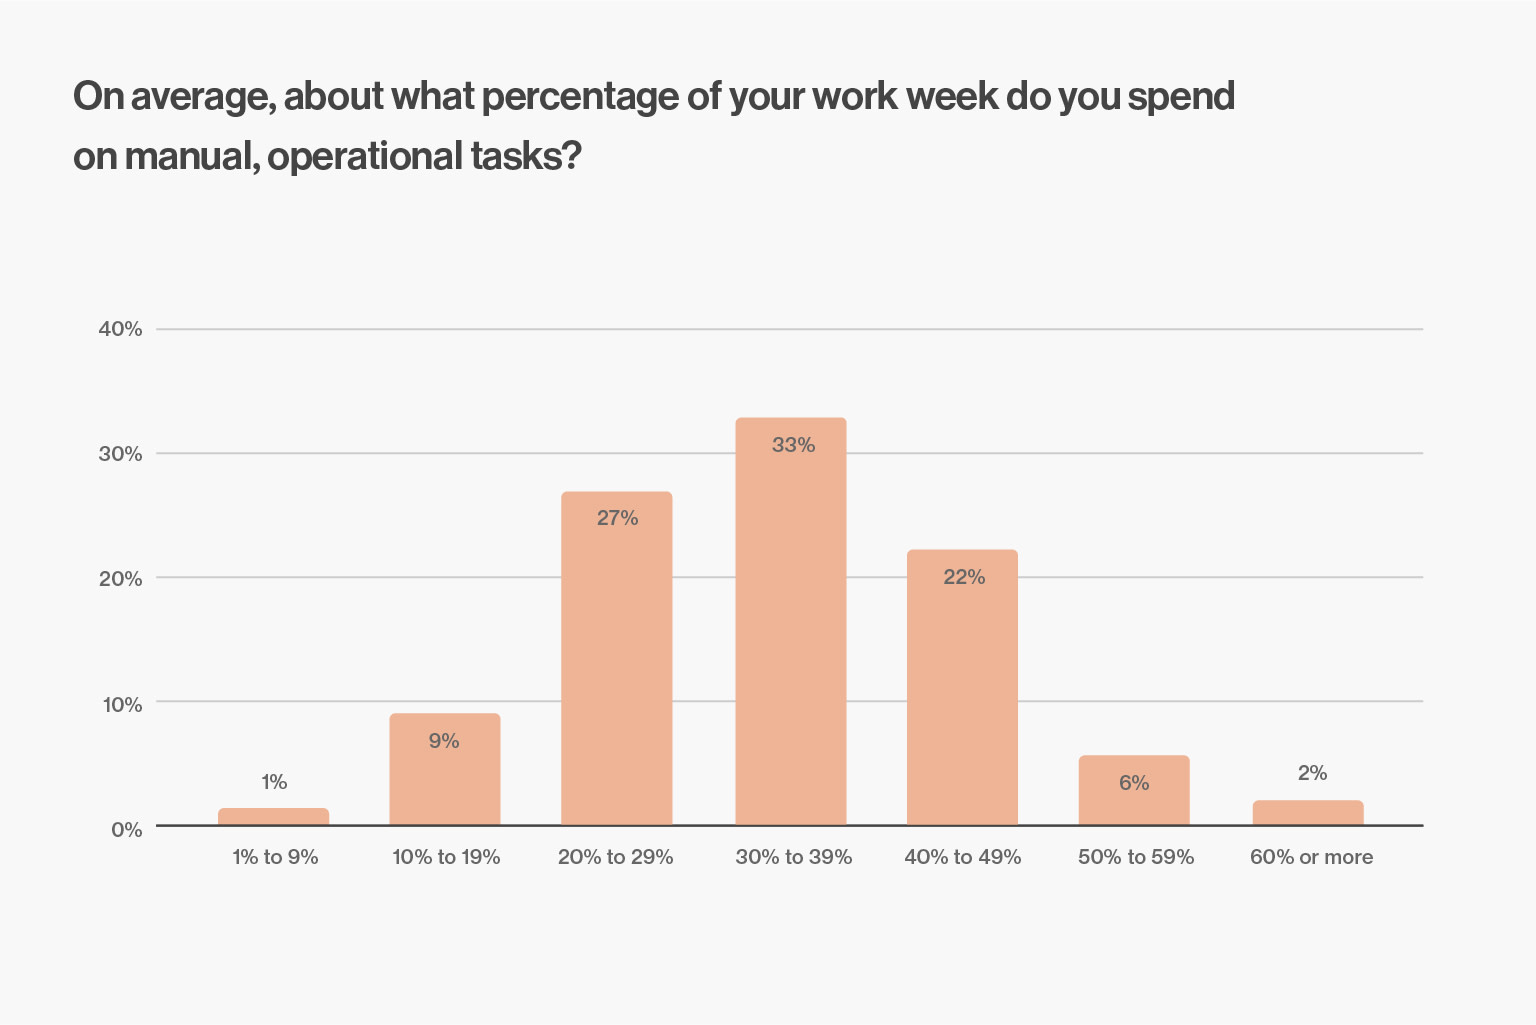 Survey question that reads: On average, what percentage of your work week do you spend on manual, operational tasks? Answer breakdown: 1% - 1-9%; 9% - 10-19%; 27% - 20-29%; 33% - 30-39%; 22% - 40-49%; 6% - 50-59%; 2% - 60% or more